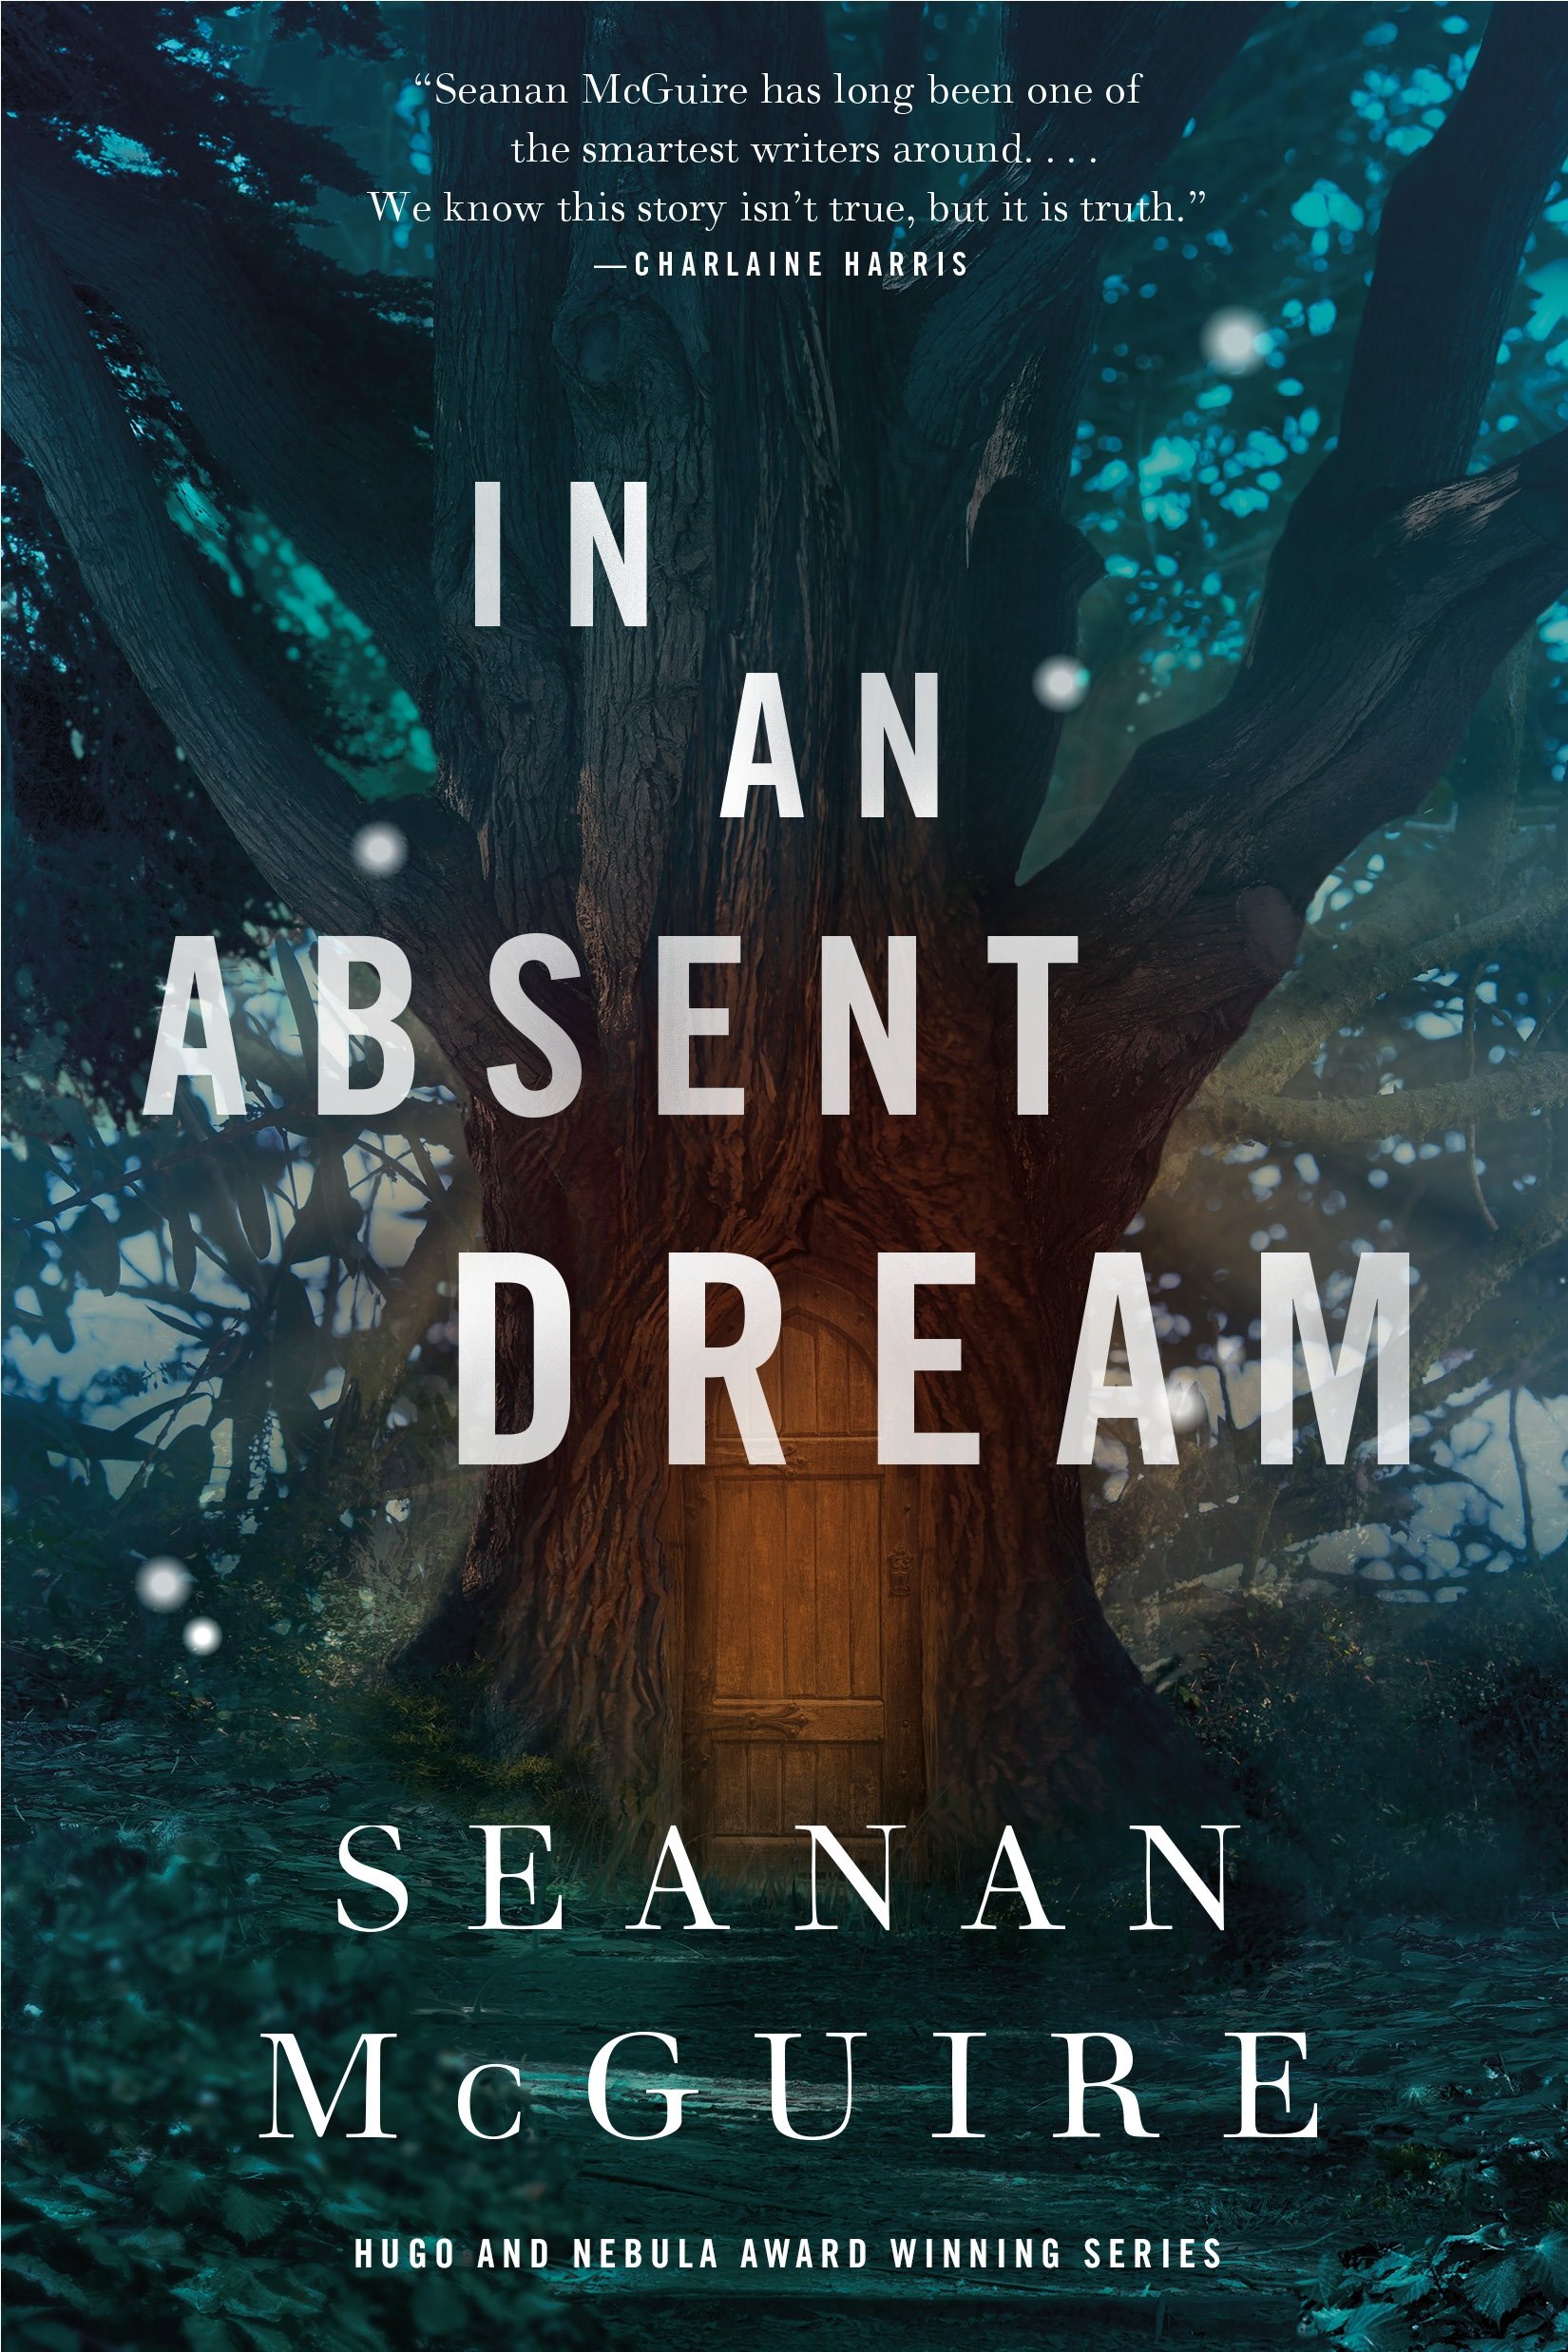 Cover of In an Absent Dream by Seanan McGuire.